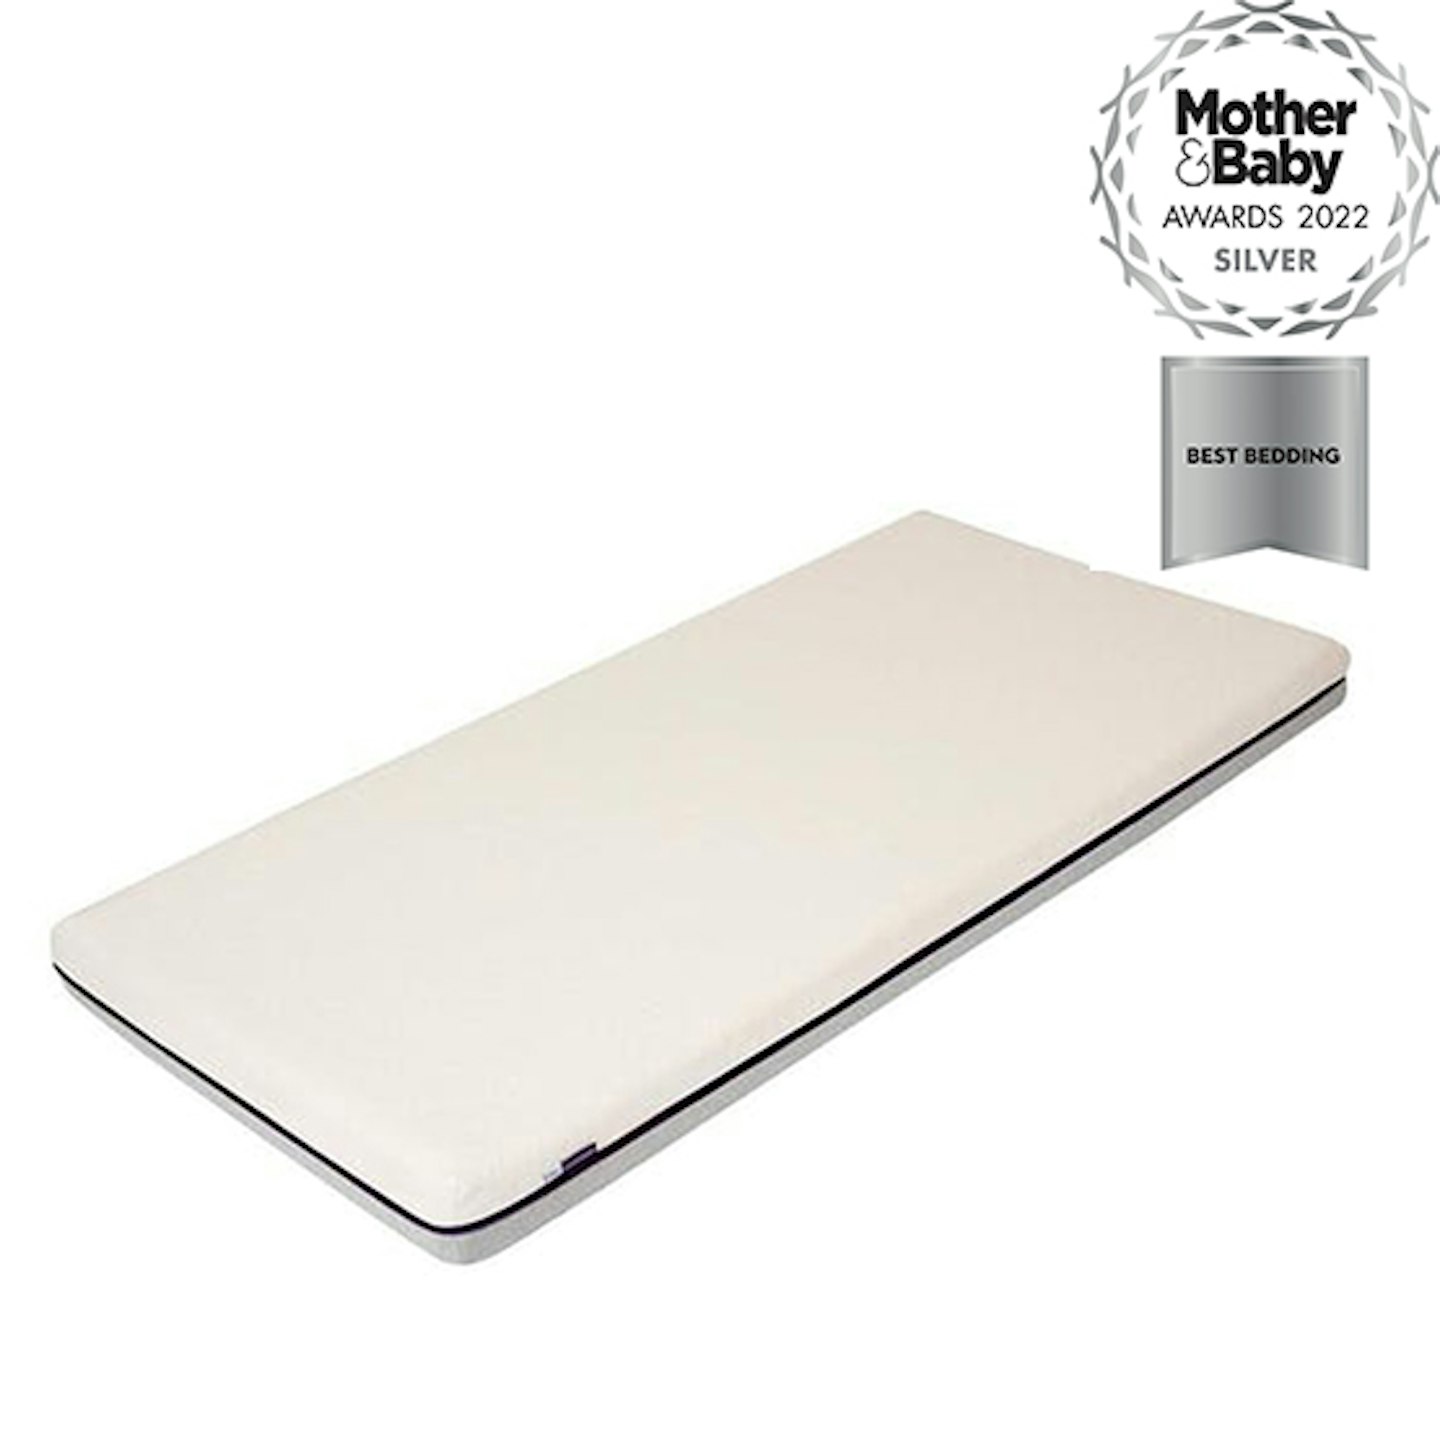 clevafoam-support-baby-mattress silver product card